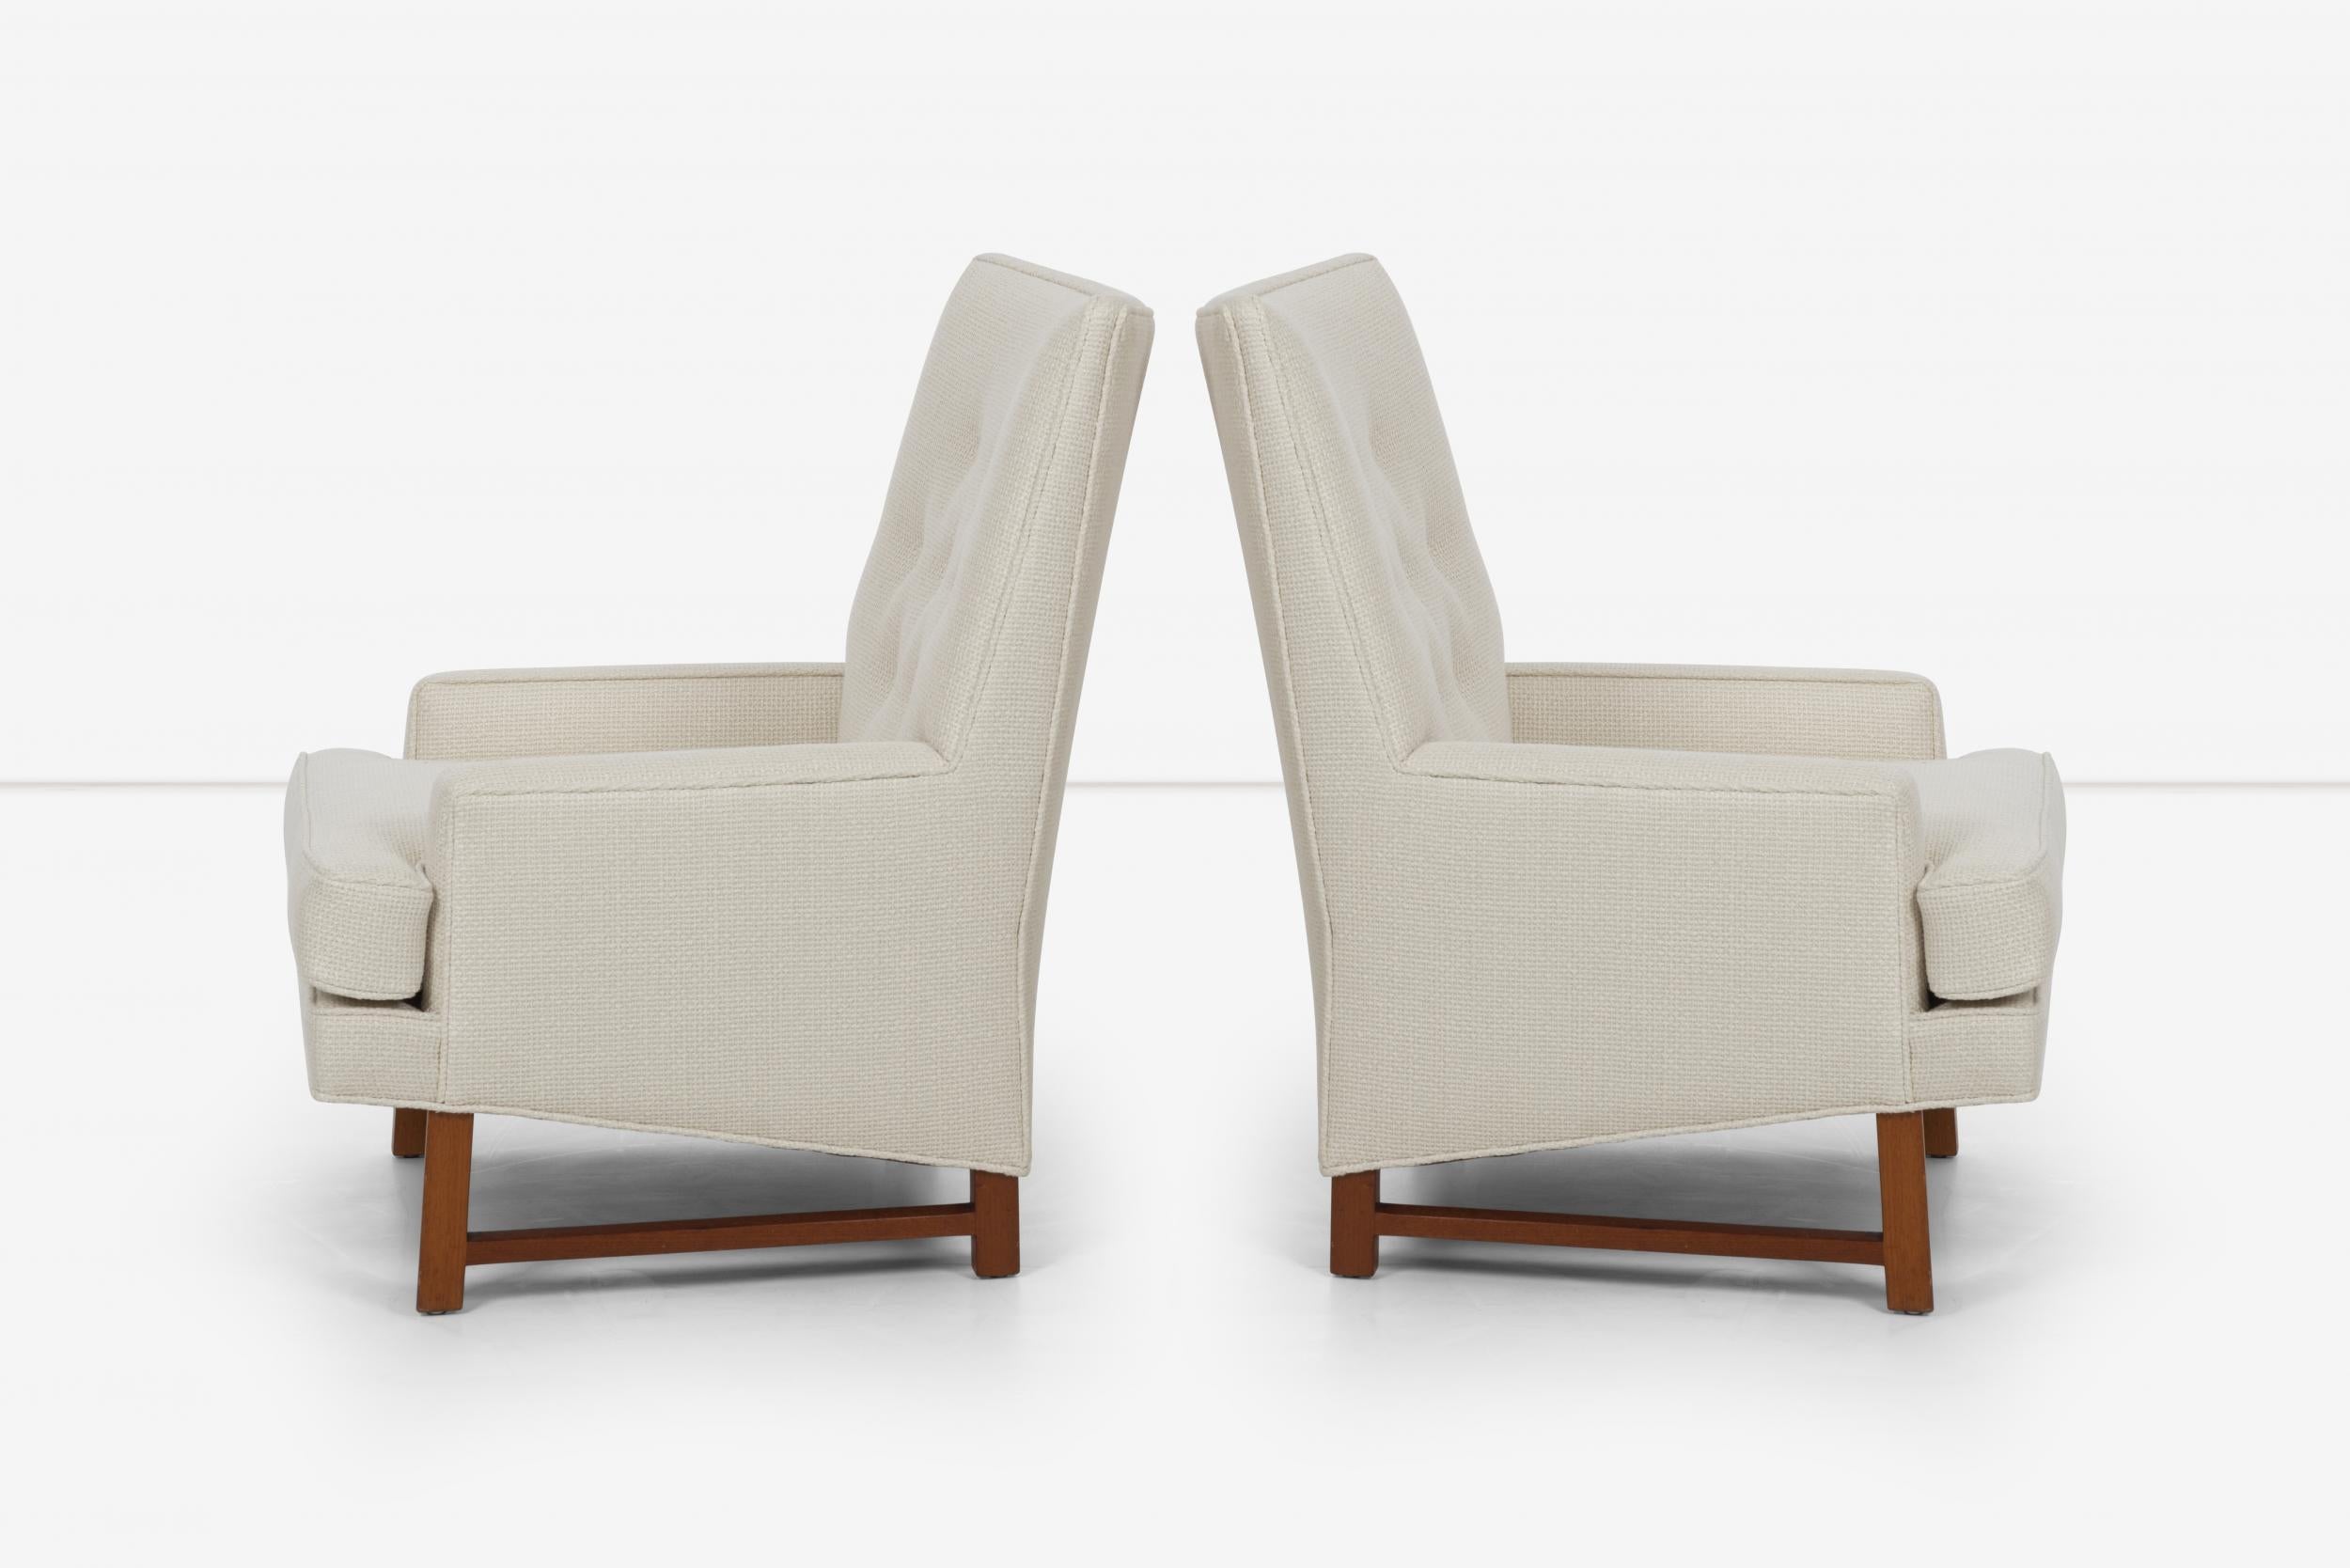 Appliqué Pair of Edward Wormley Janus Group Lounge Chairs